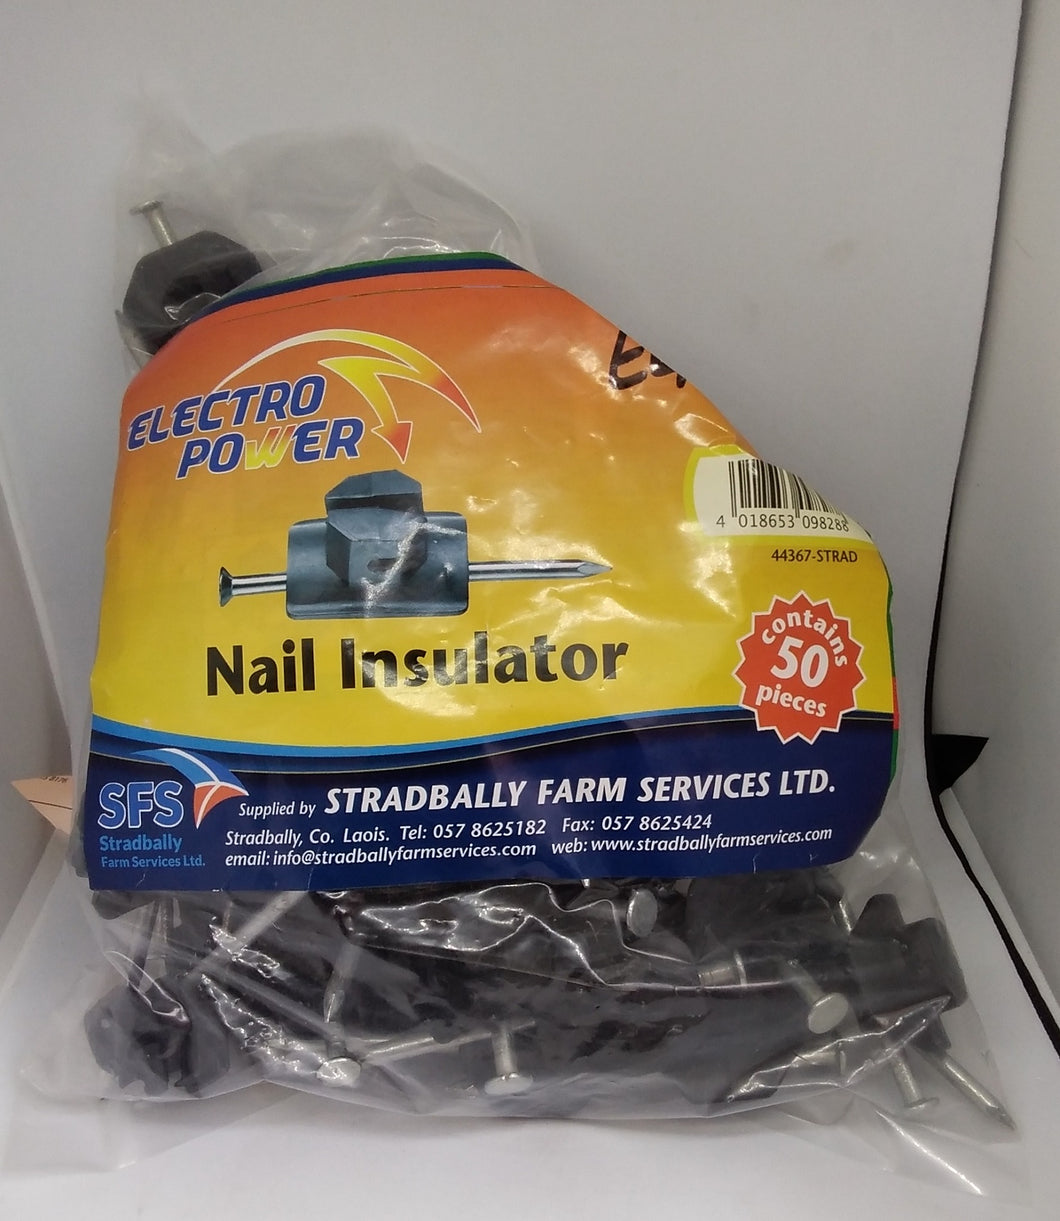 Electro Power Nail Insulator - 50 Pack